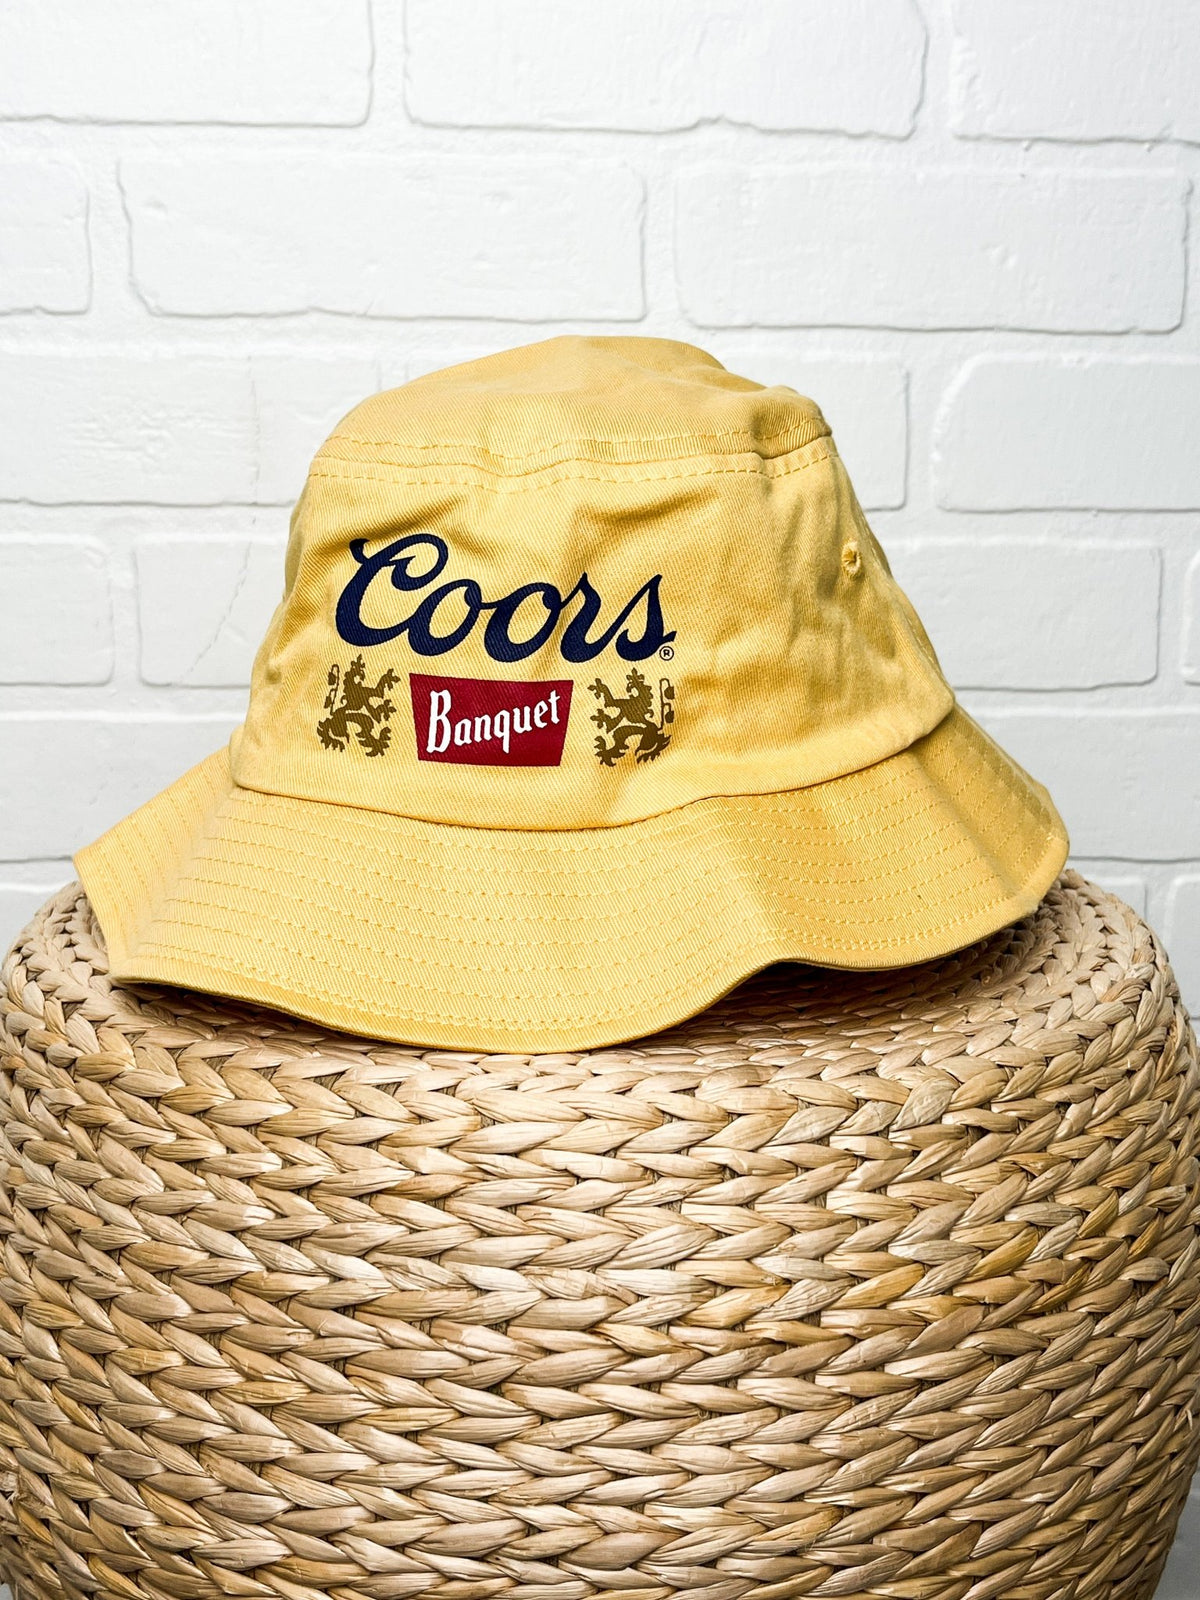 Coors twill bucket hat bleached sun - Trendy Gifts at Lush Fashion Lounge Boutique in Oklahoma City